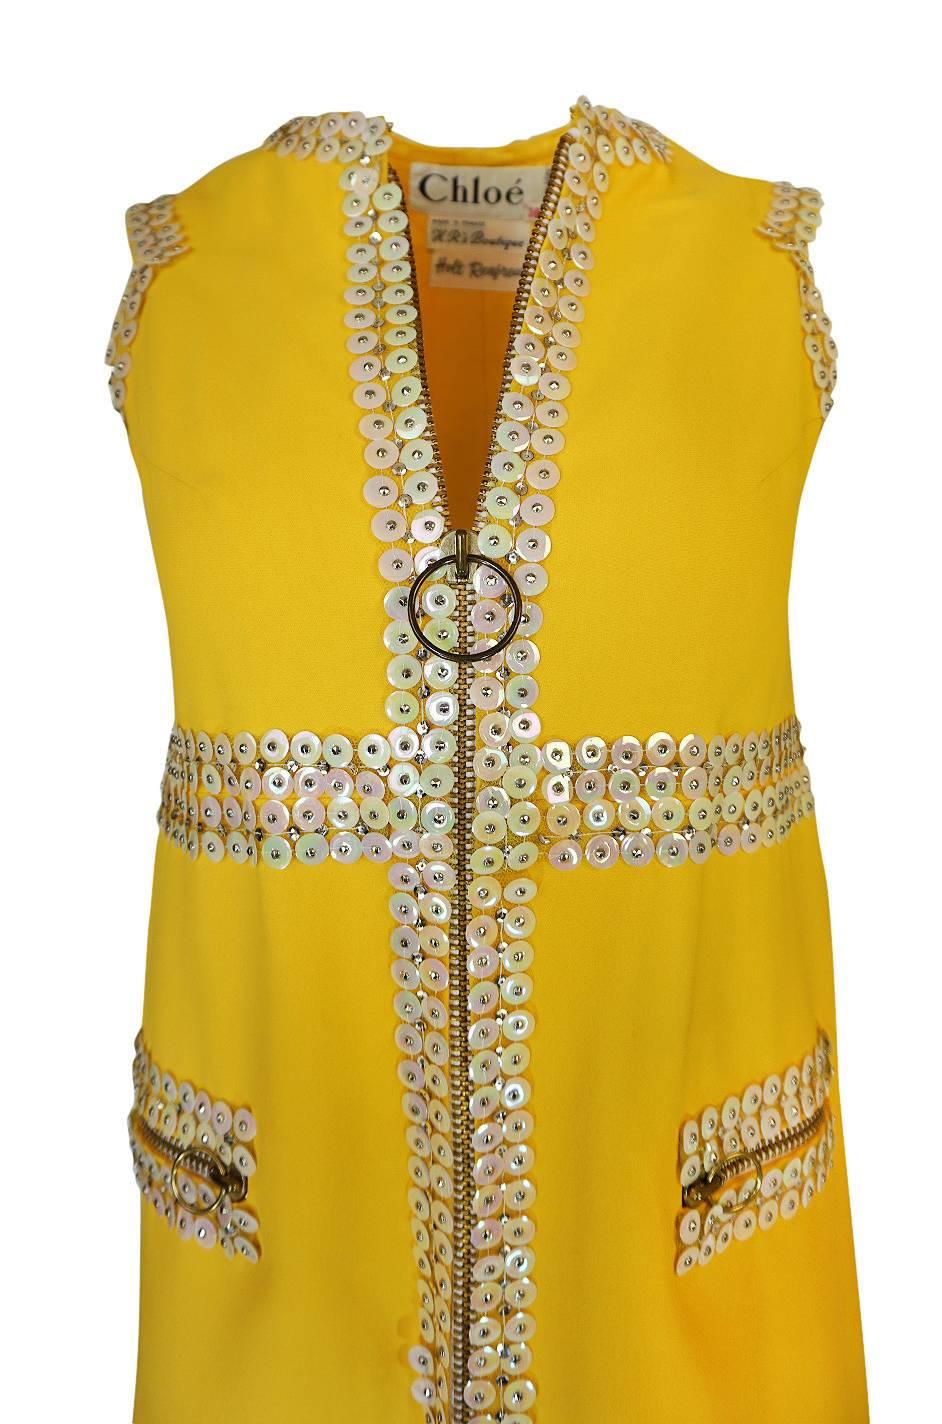 Chloe by Karl Lagerfeld Stud and Paillettes Yellow Mini Dress circa 1967 2